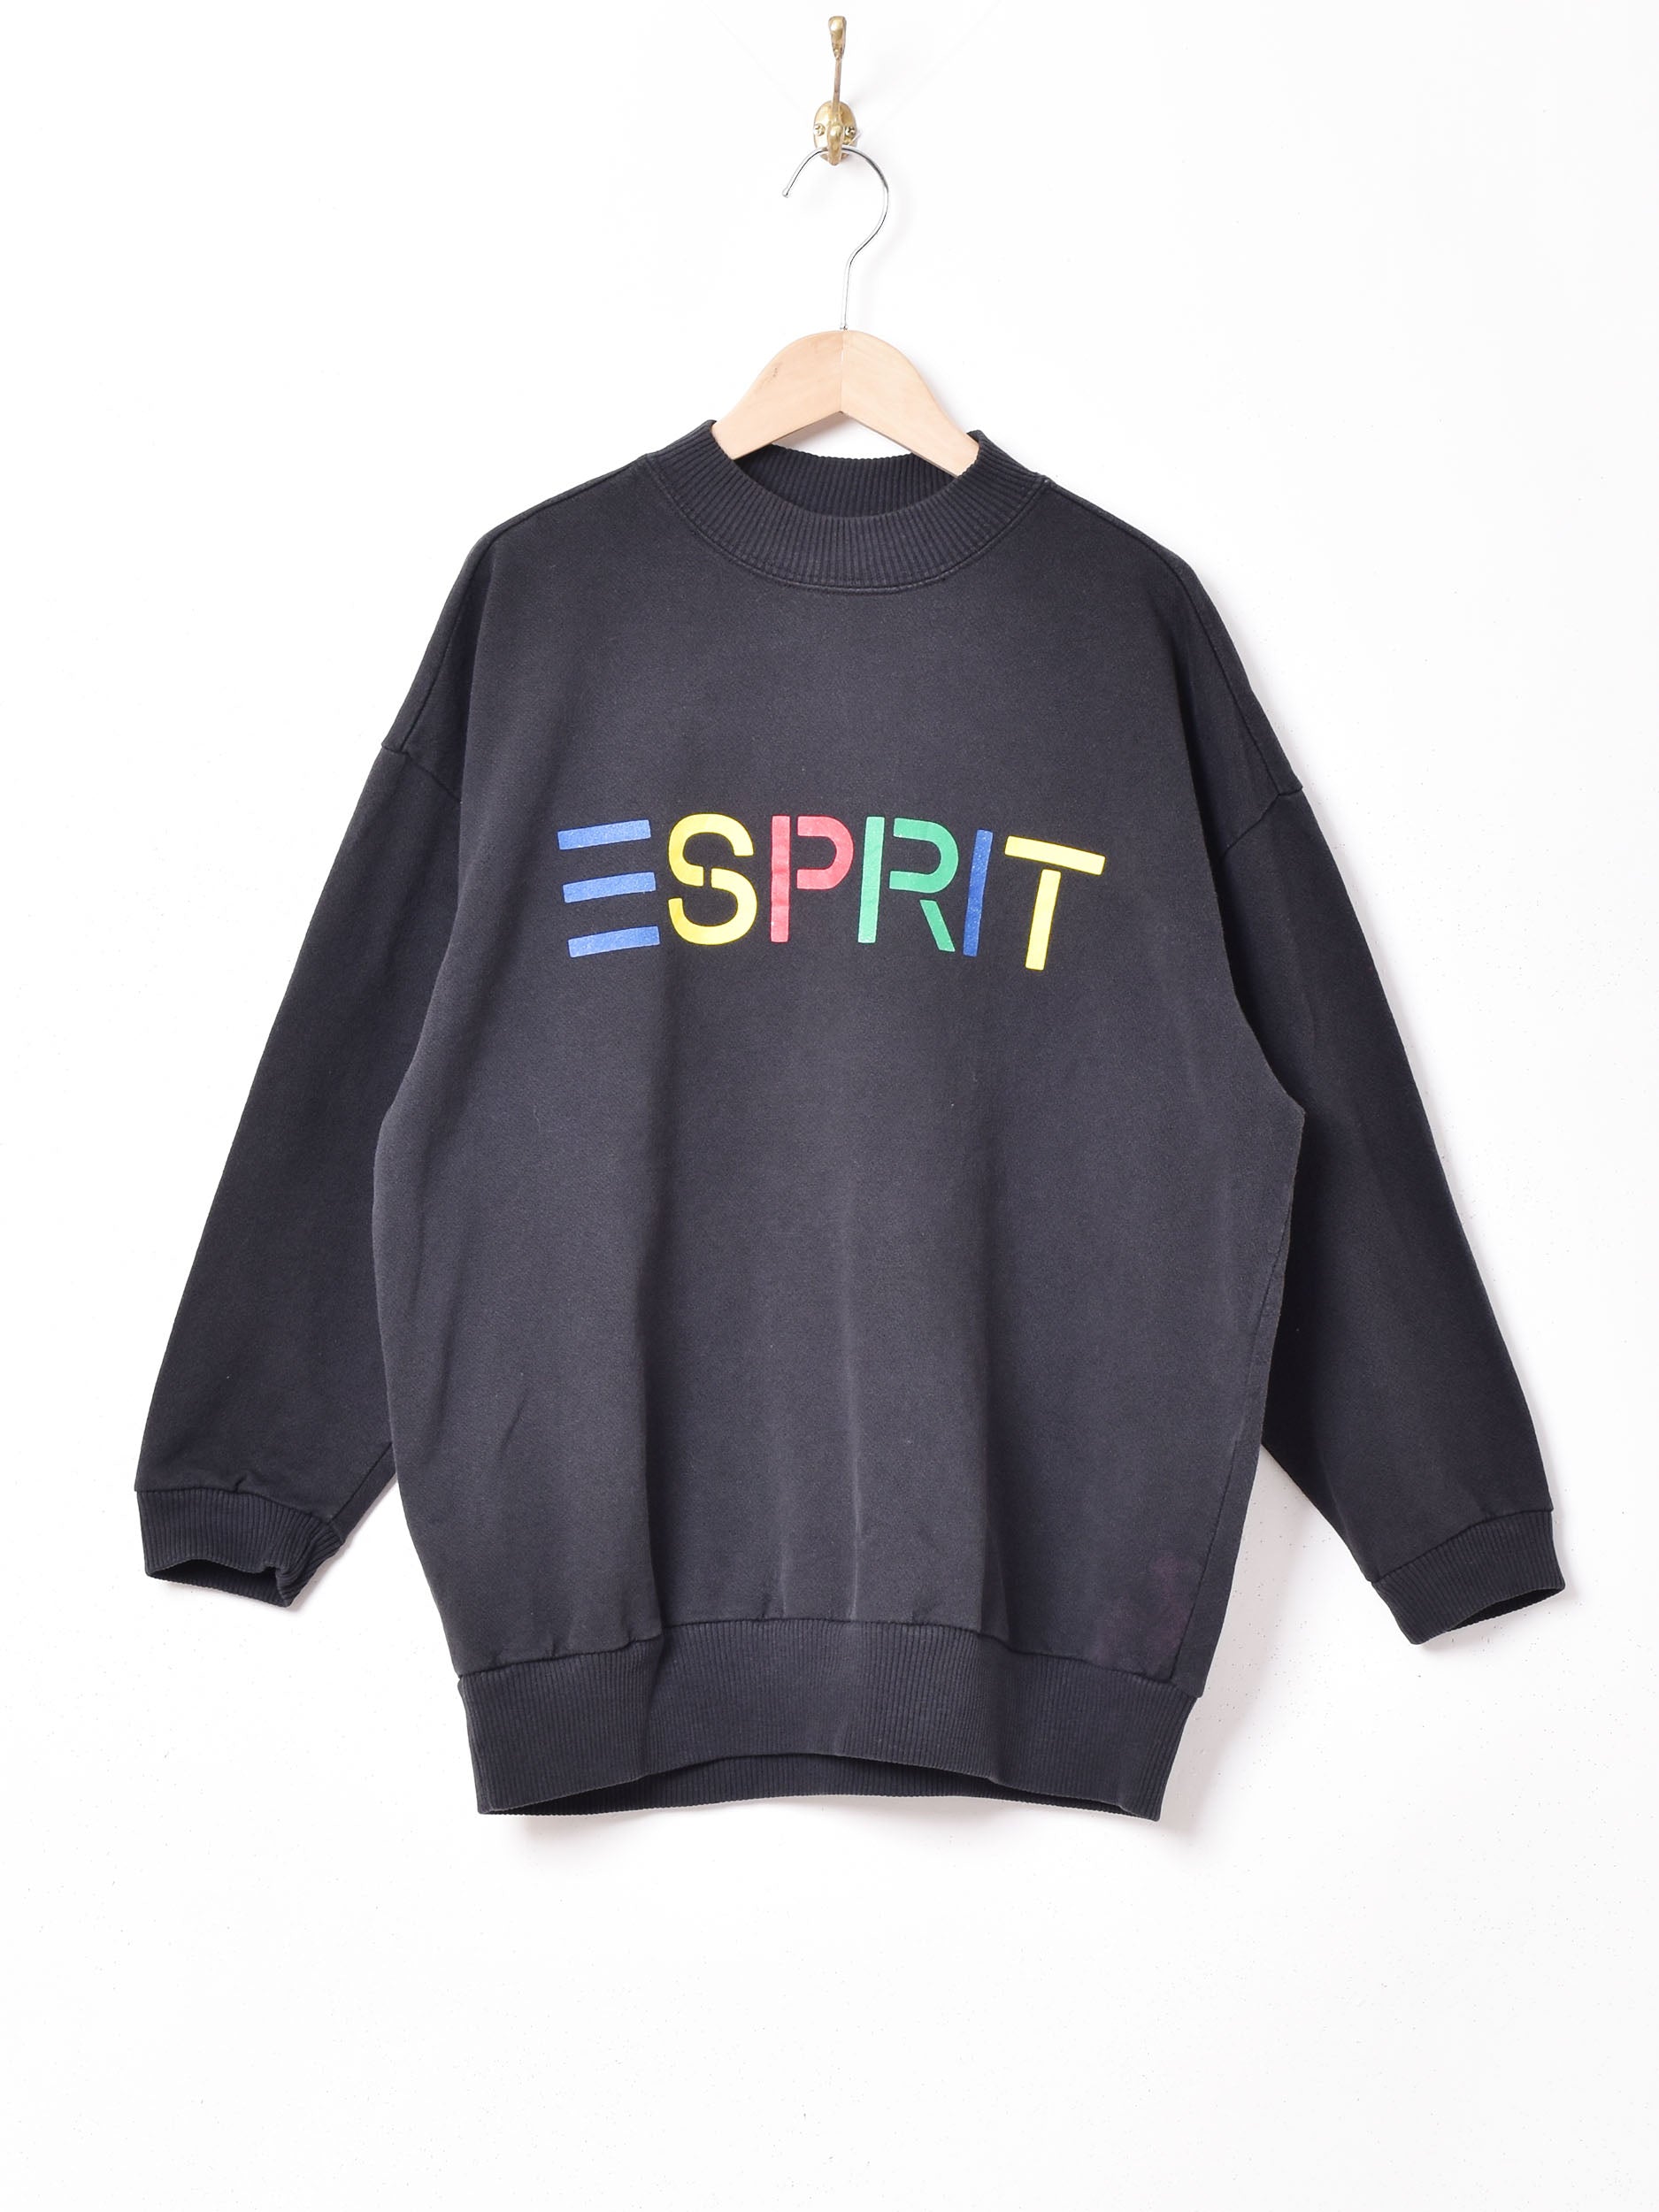 ESPRIT ロゴプリントスウェット – 古着屋Top of the Hillのネット